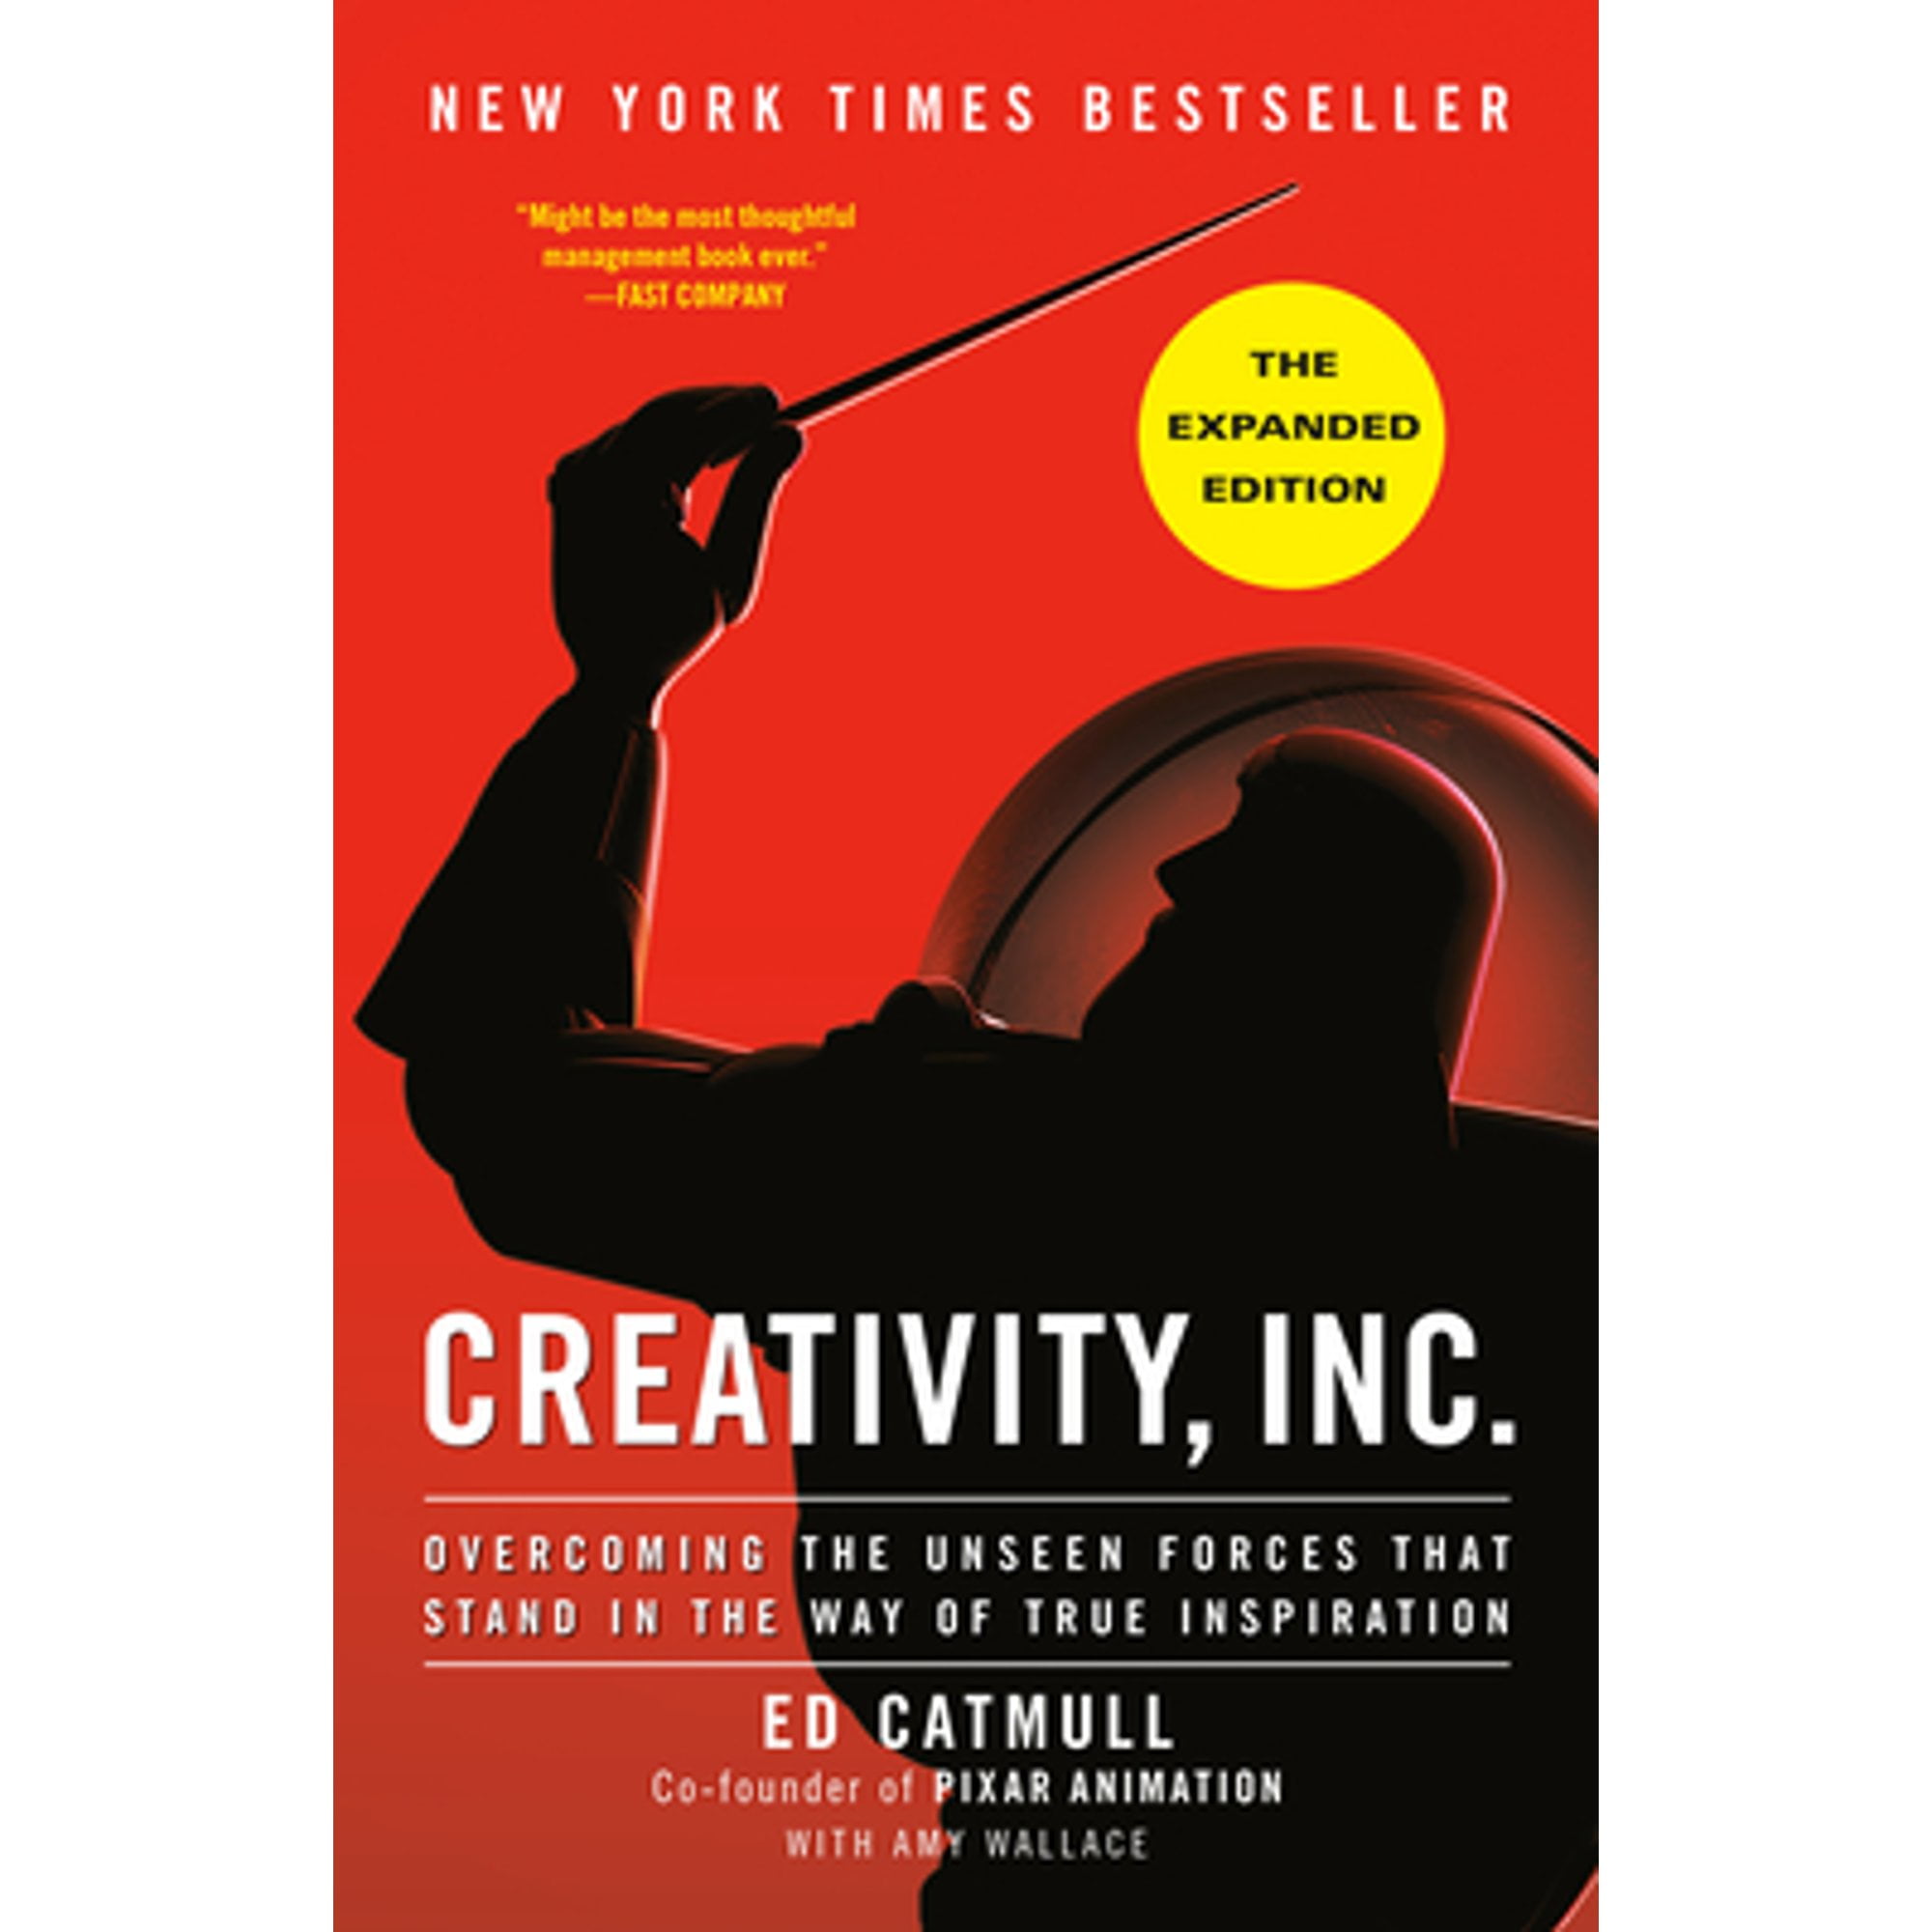 Pre-Owned Creativity, Inc. (the Expanded Edition): Overcoming the Unseen Forces That Stand in the (Hardcover) by Ed Catmull, Amy Wallace